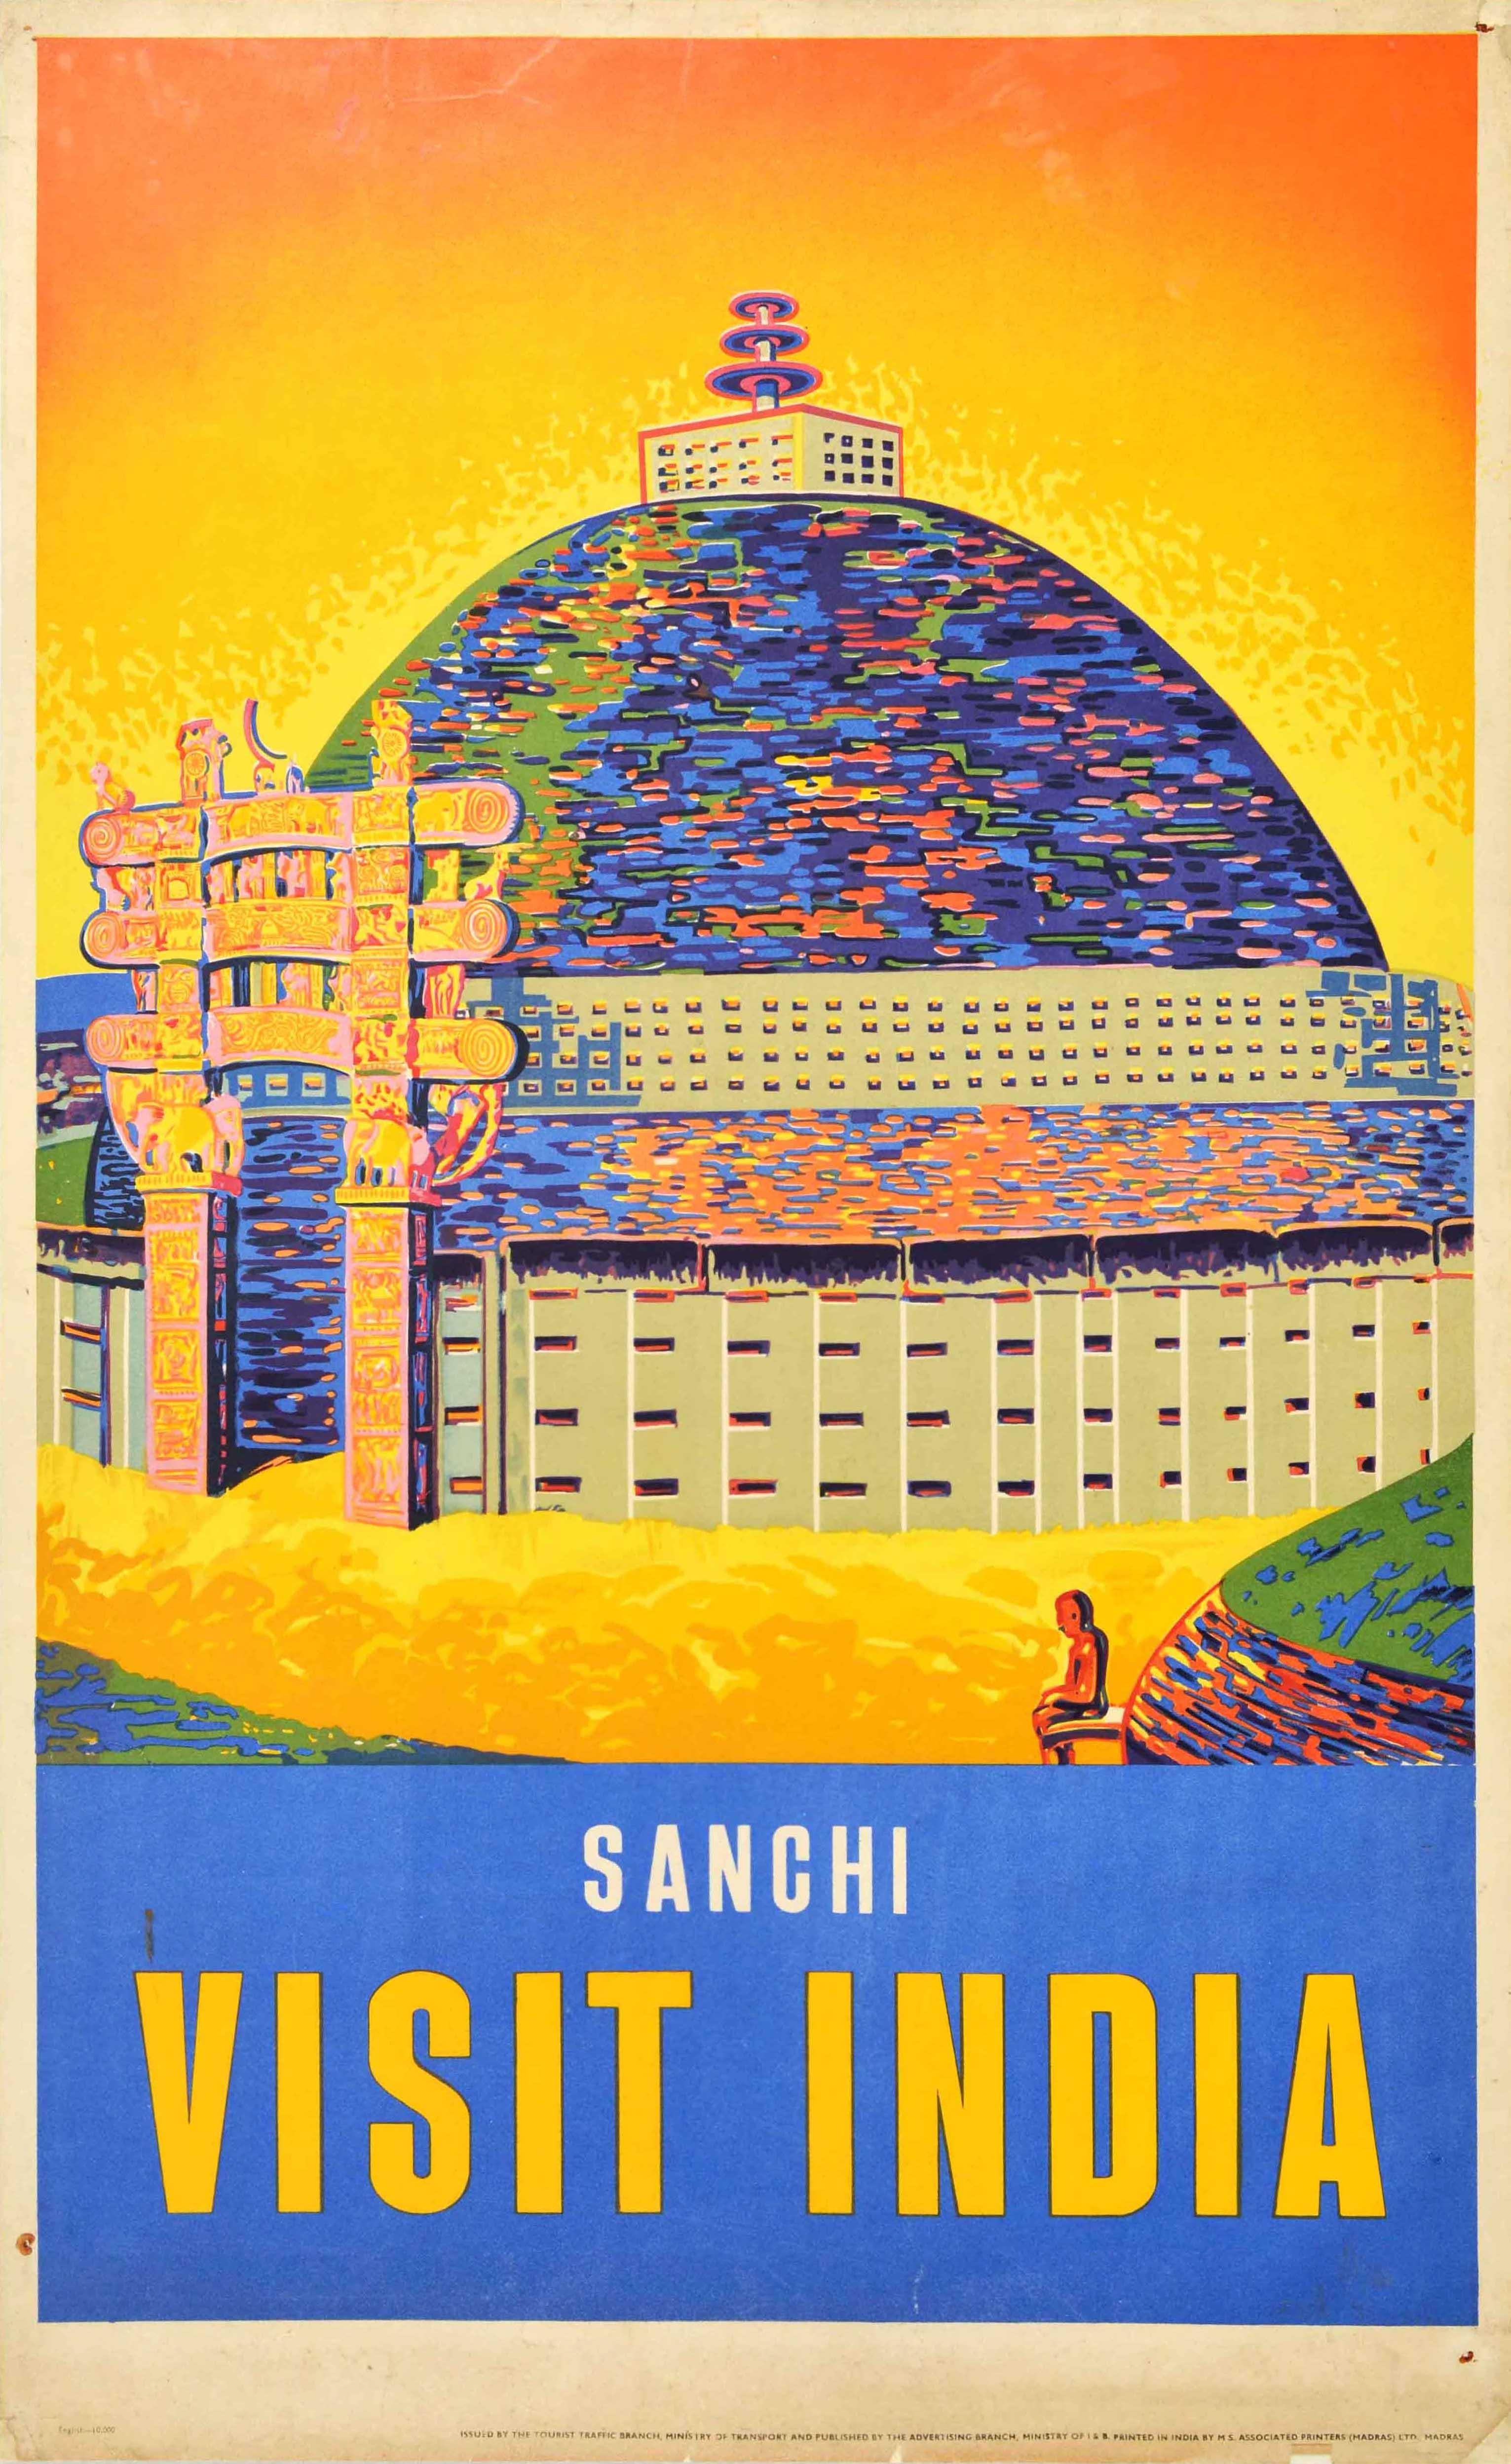 Unknown Print - Original Vintage Poster For Sanchi Visit India Architecture Great Stupa Buddhism